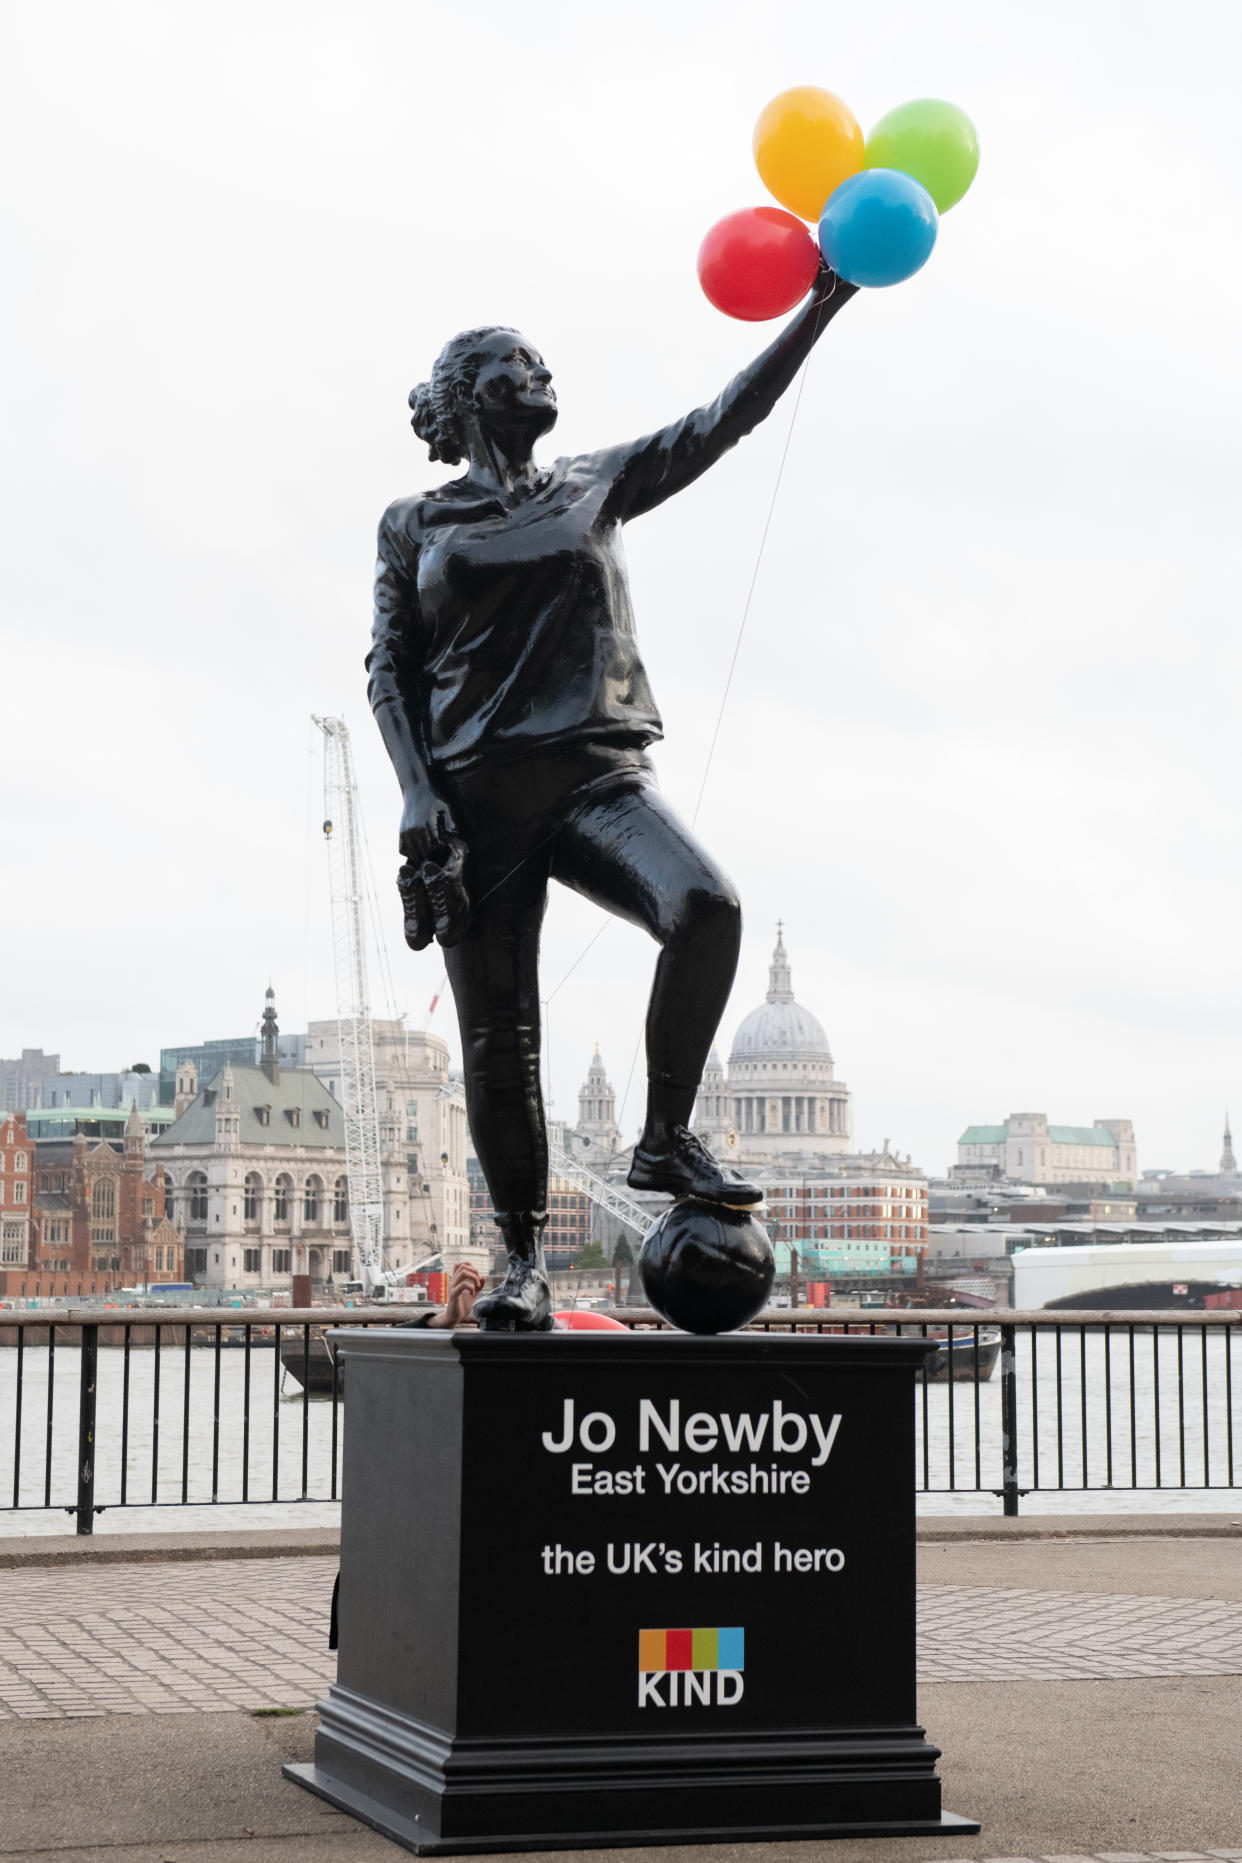 The statue is four metres tall and stands in central London (Tony Kershaw/KIND)